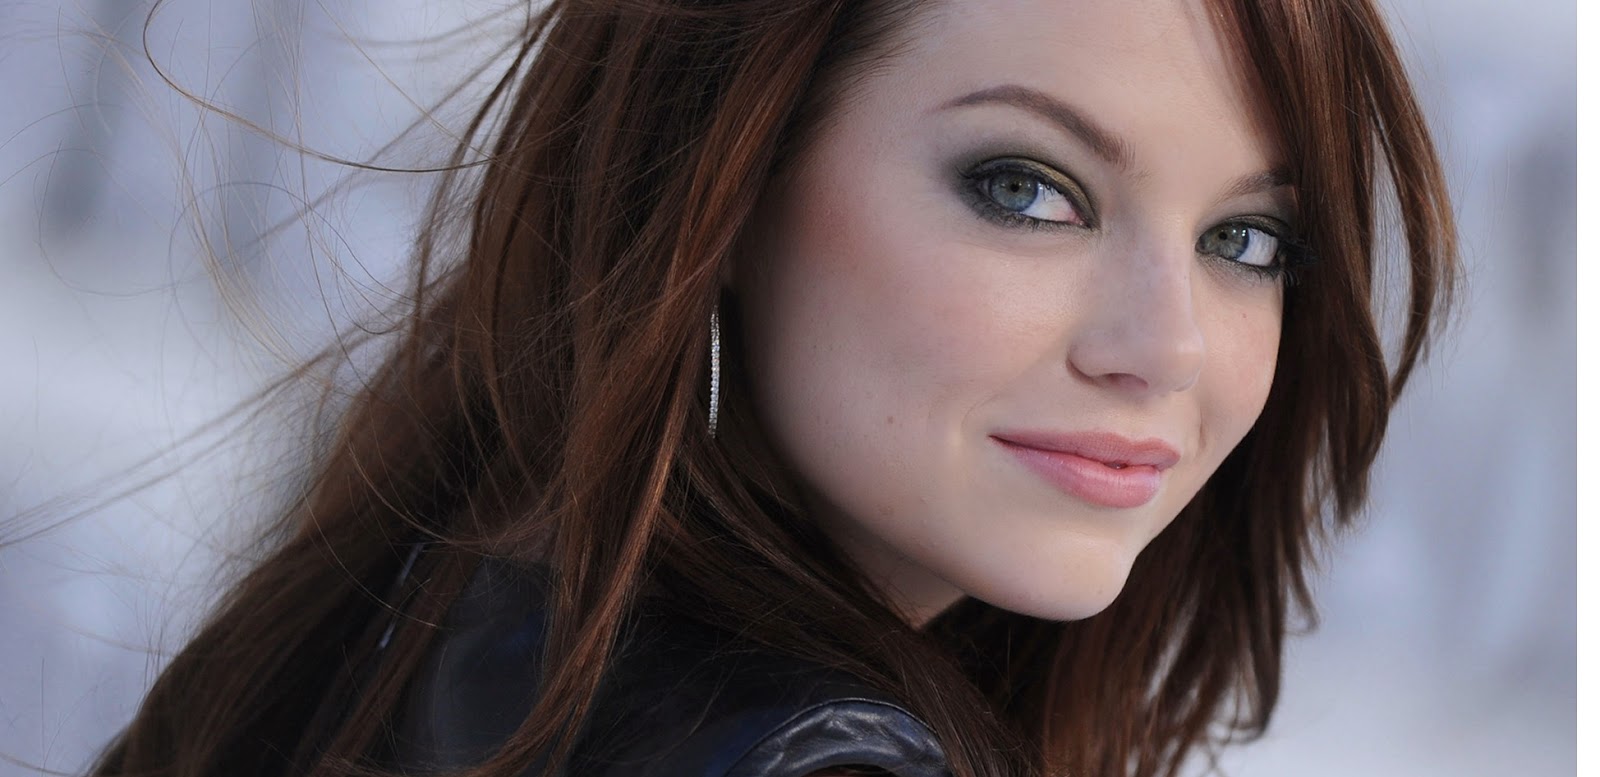 The Most Sexiest Model Emma Stone Best Wallpaper Views